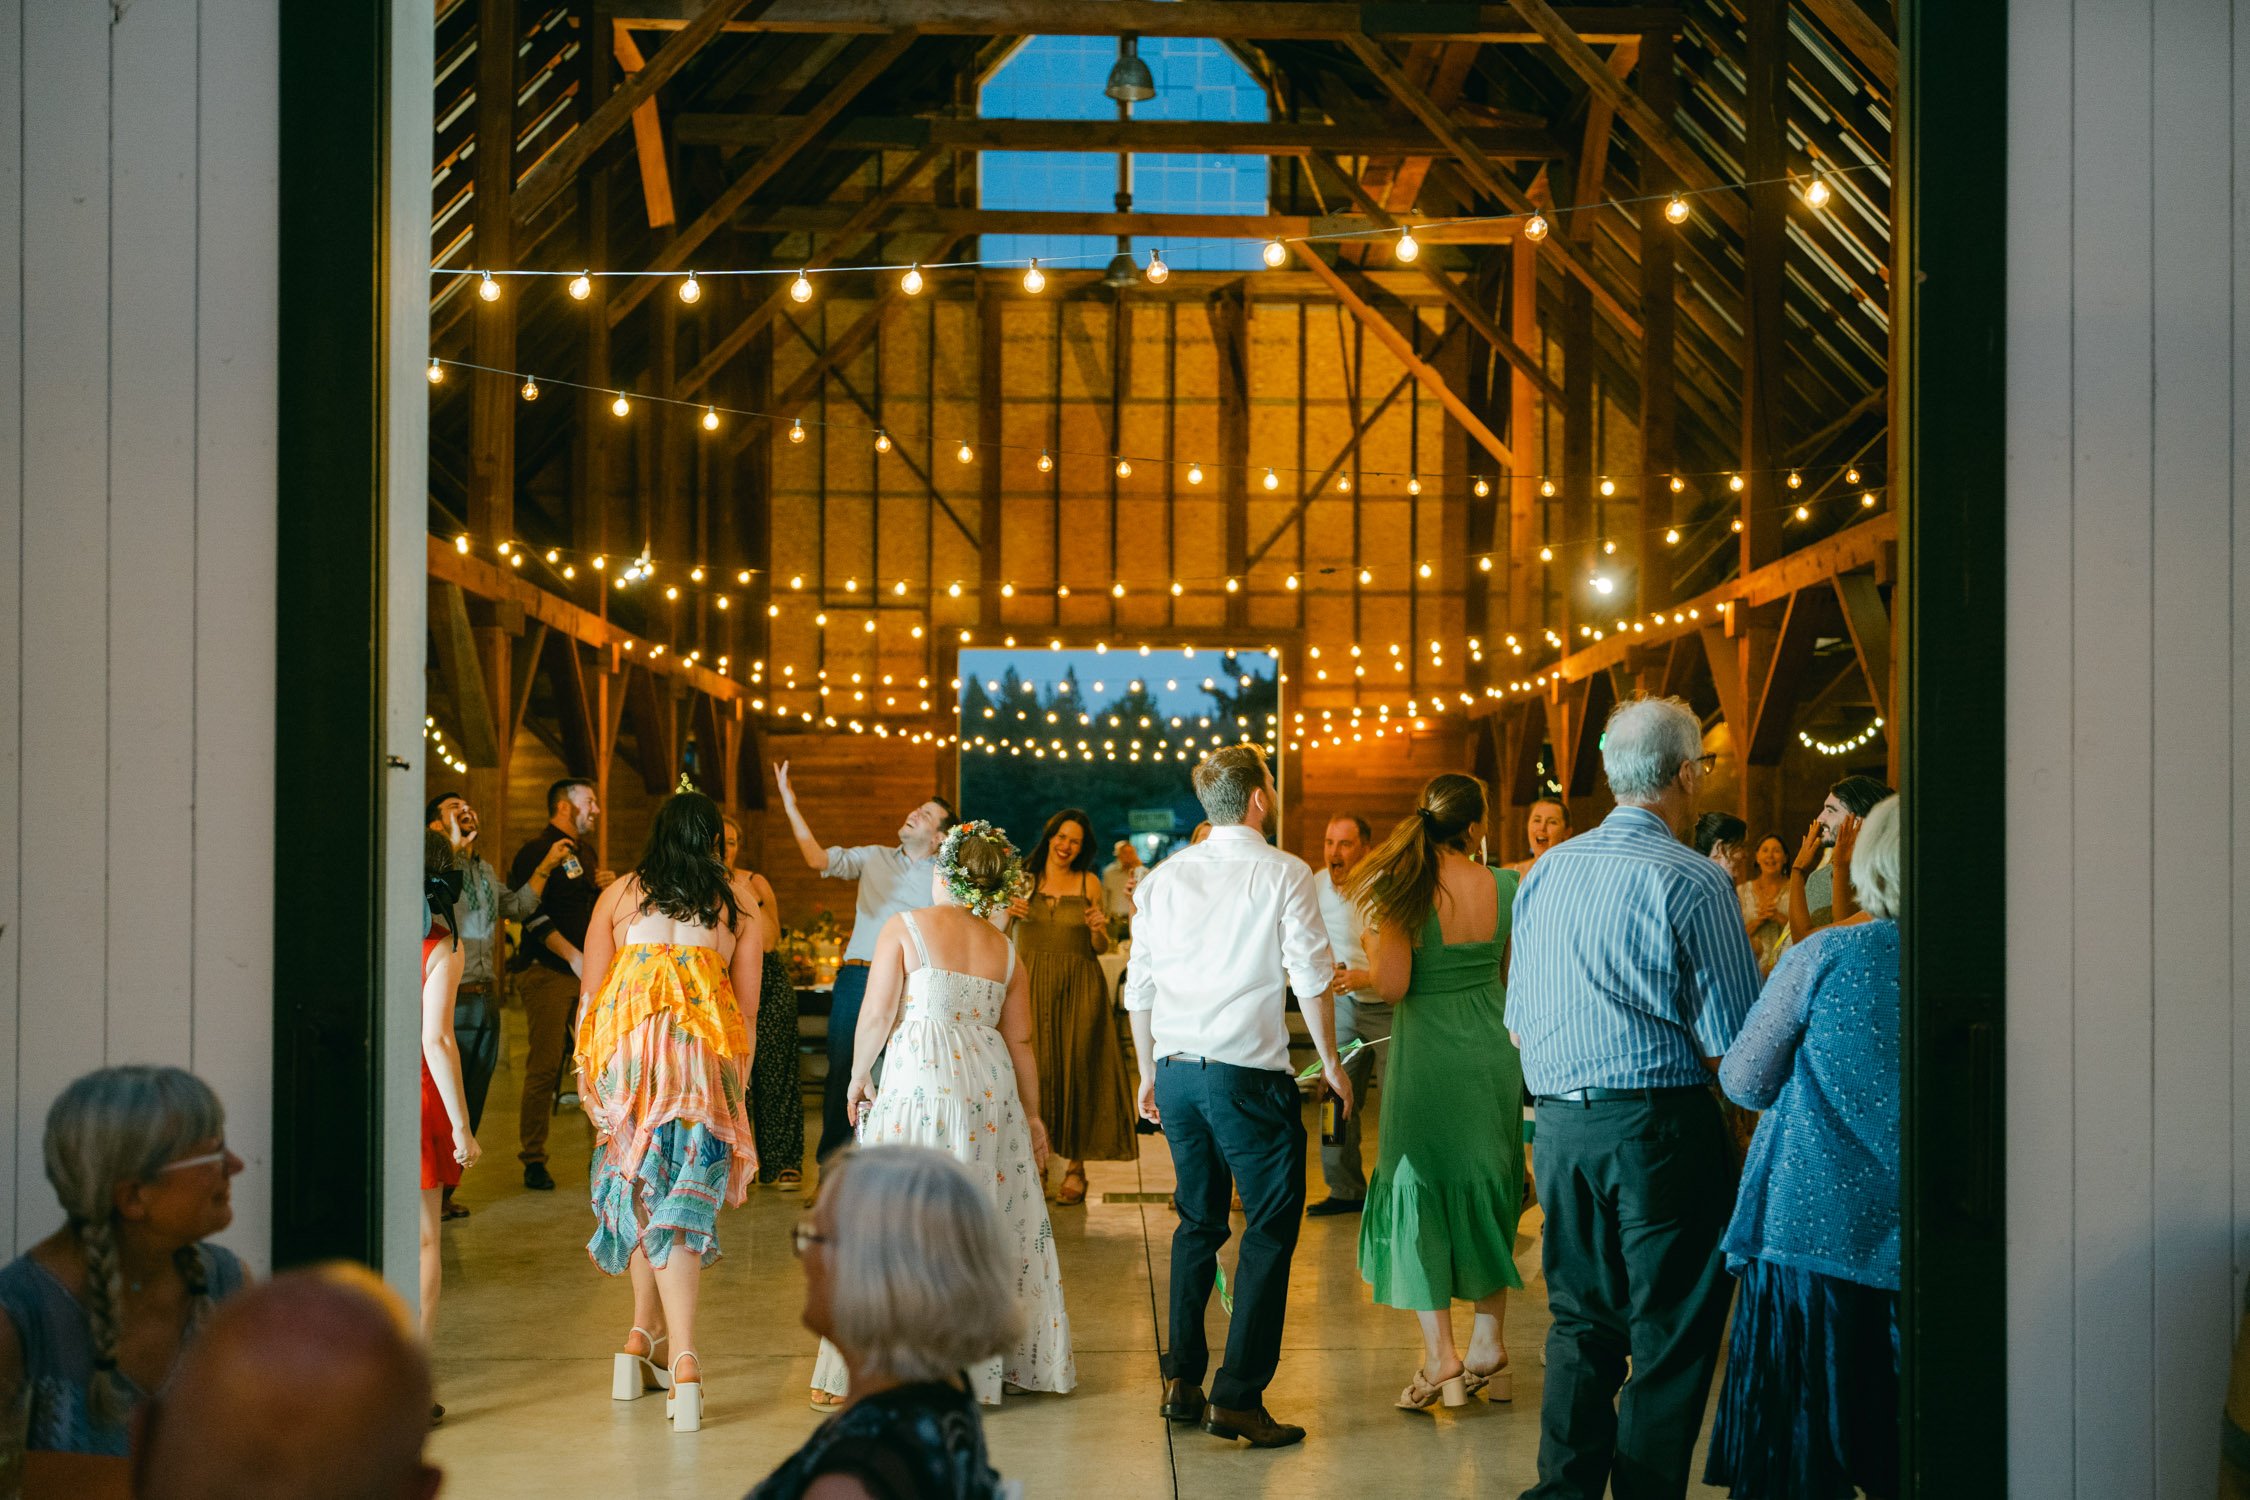 graeagle corner barn wedding, photo of the newly wed couple and guests enjoying during the night reception under the twinkling lights